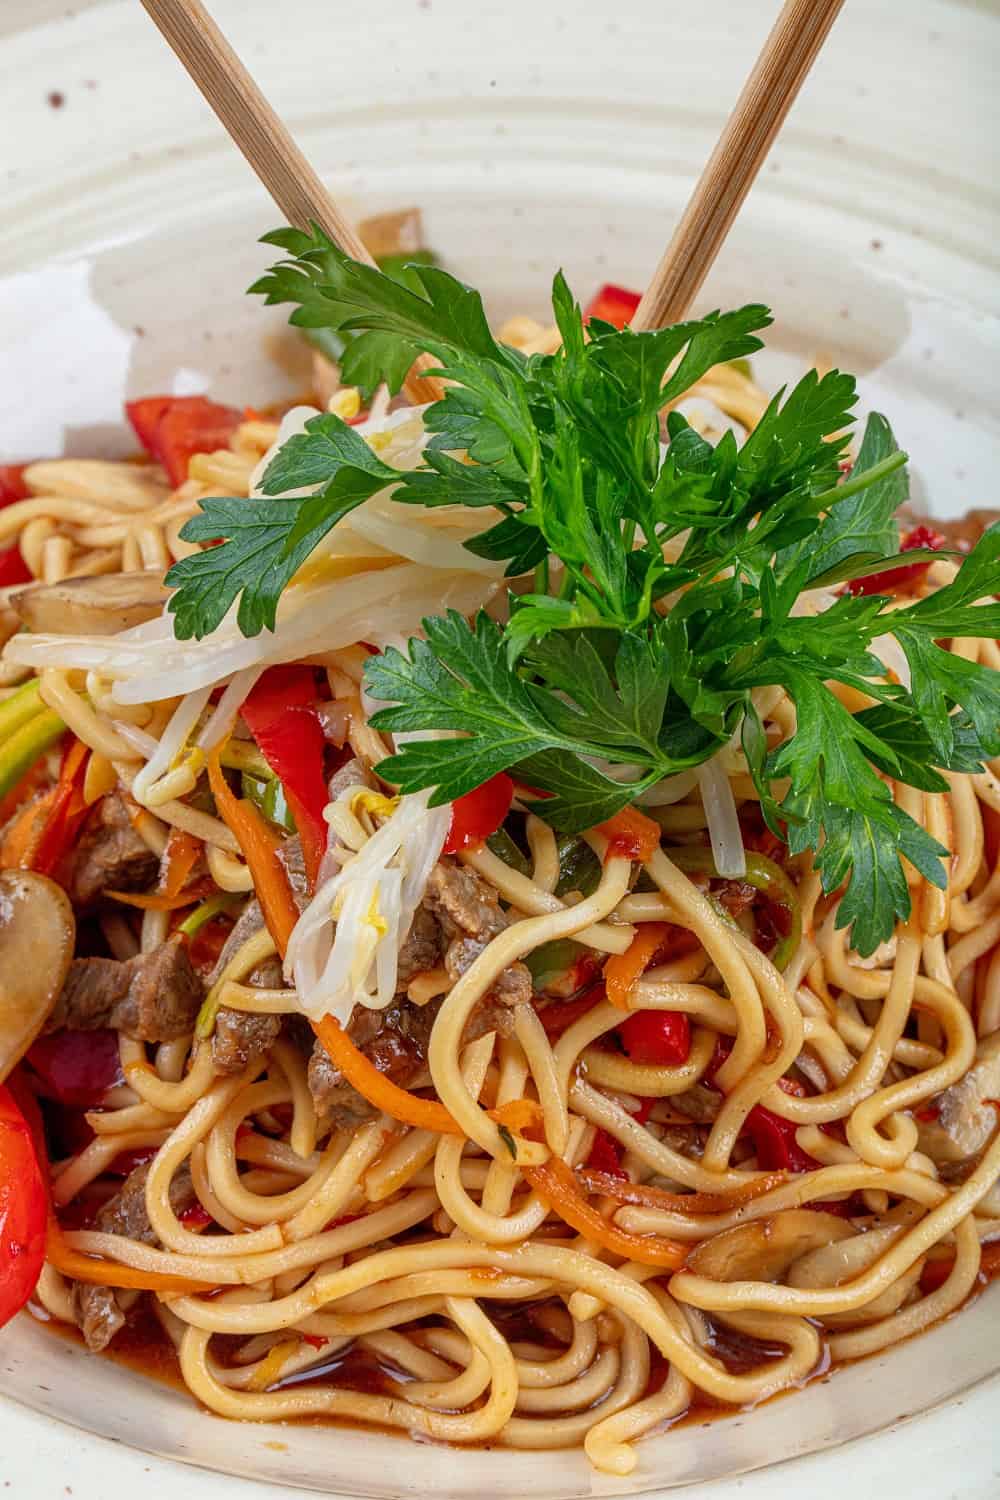 Hakka Noodles one of the popular Indo Chinese recipes